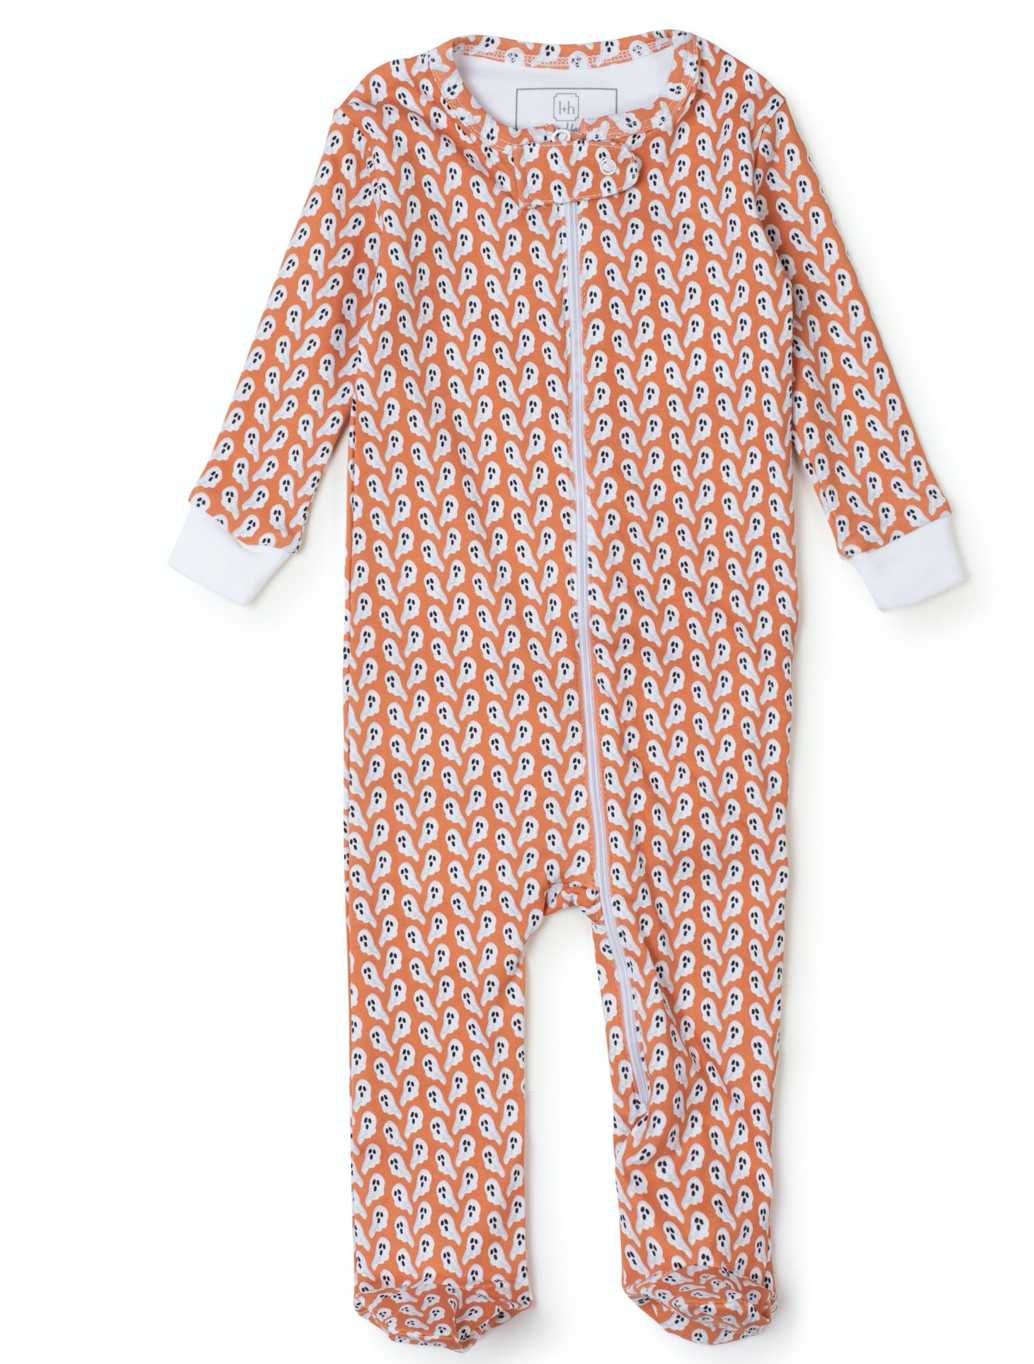 LILA AND HAYES PARKER ZIPPER PJ GHOST